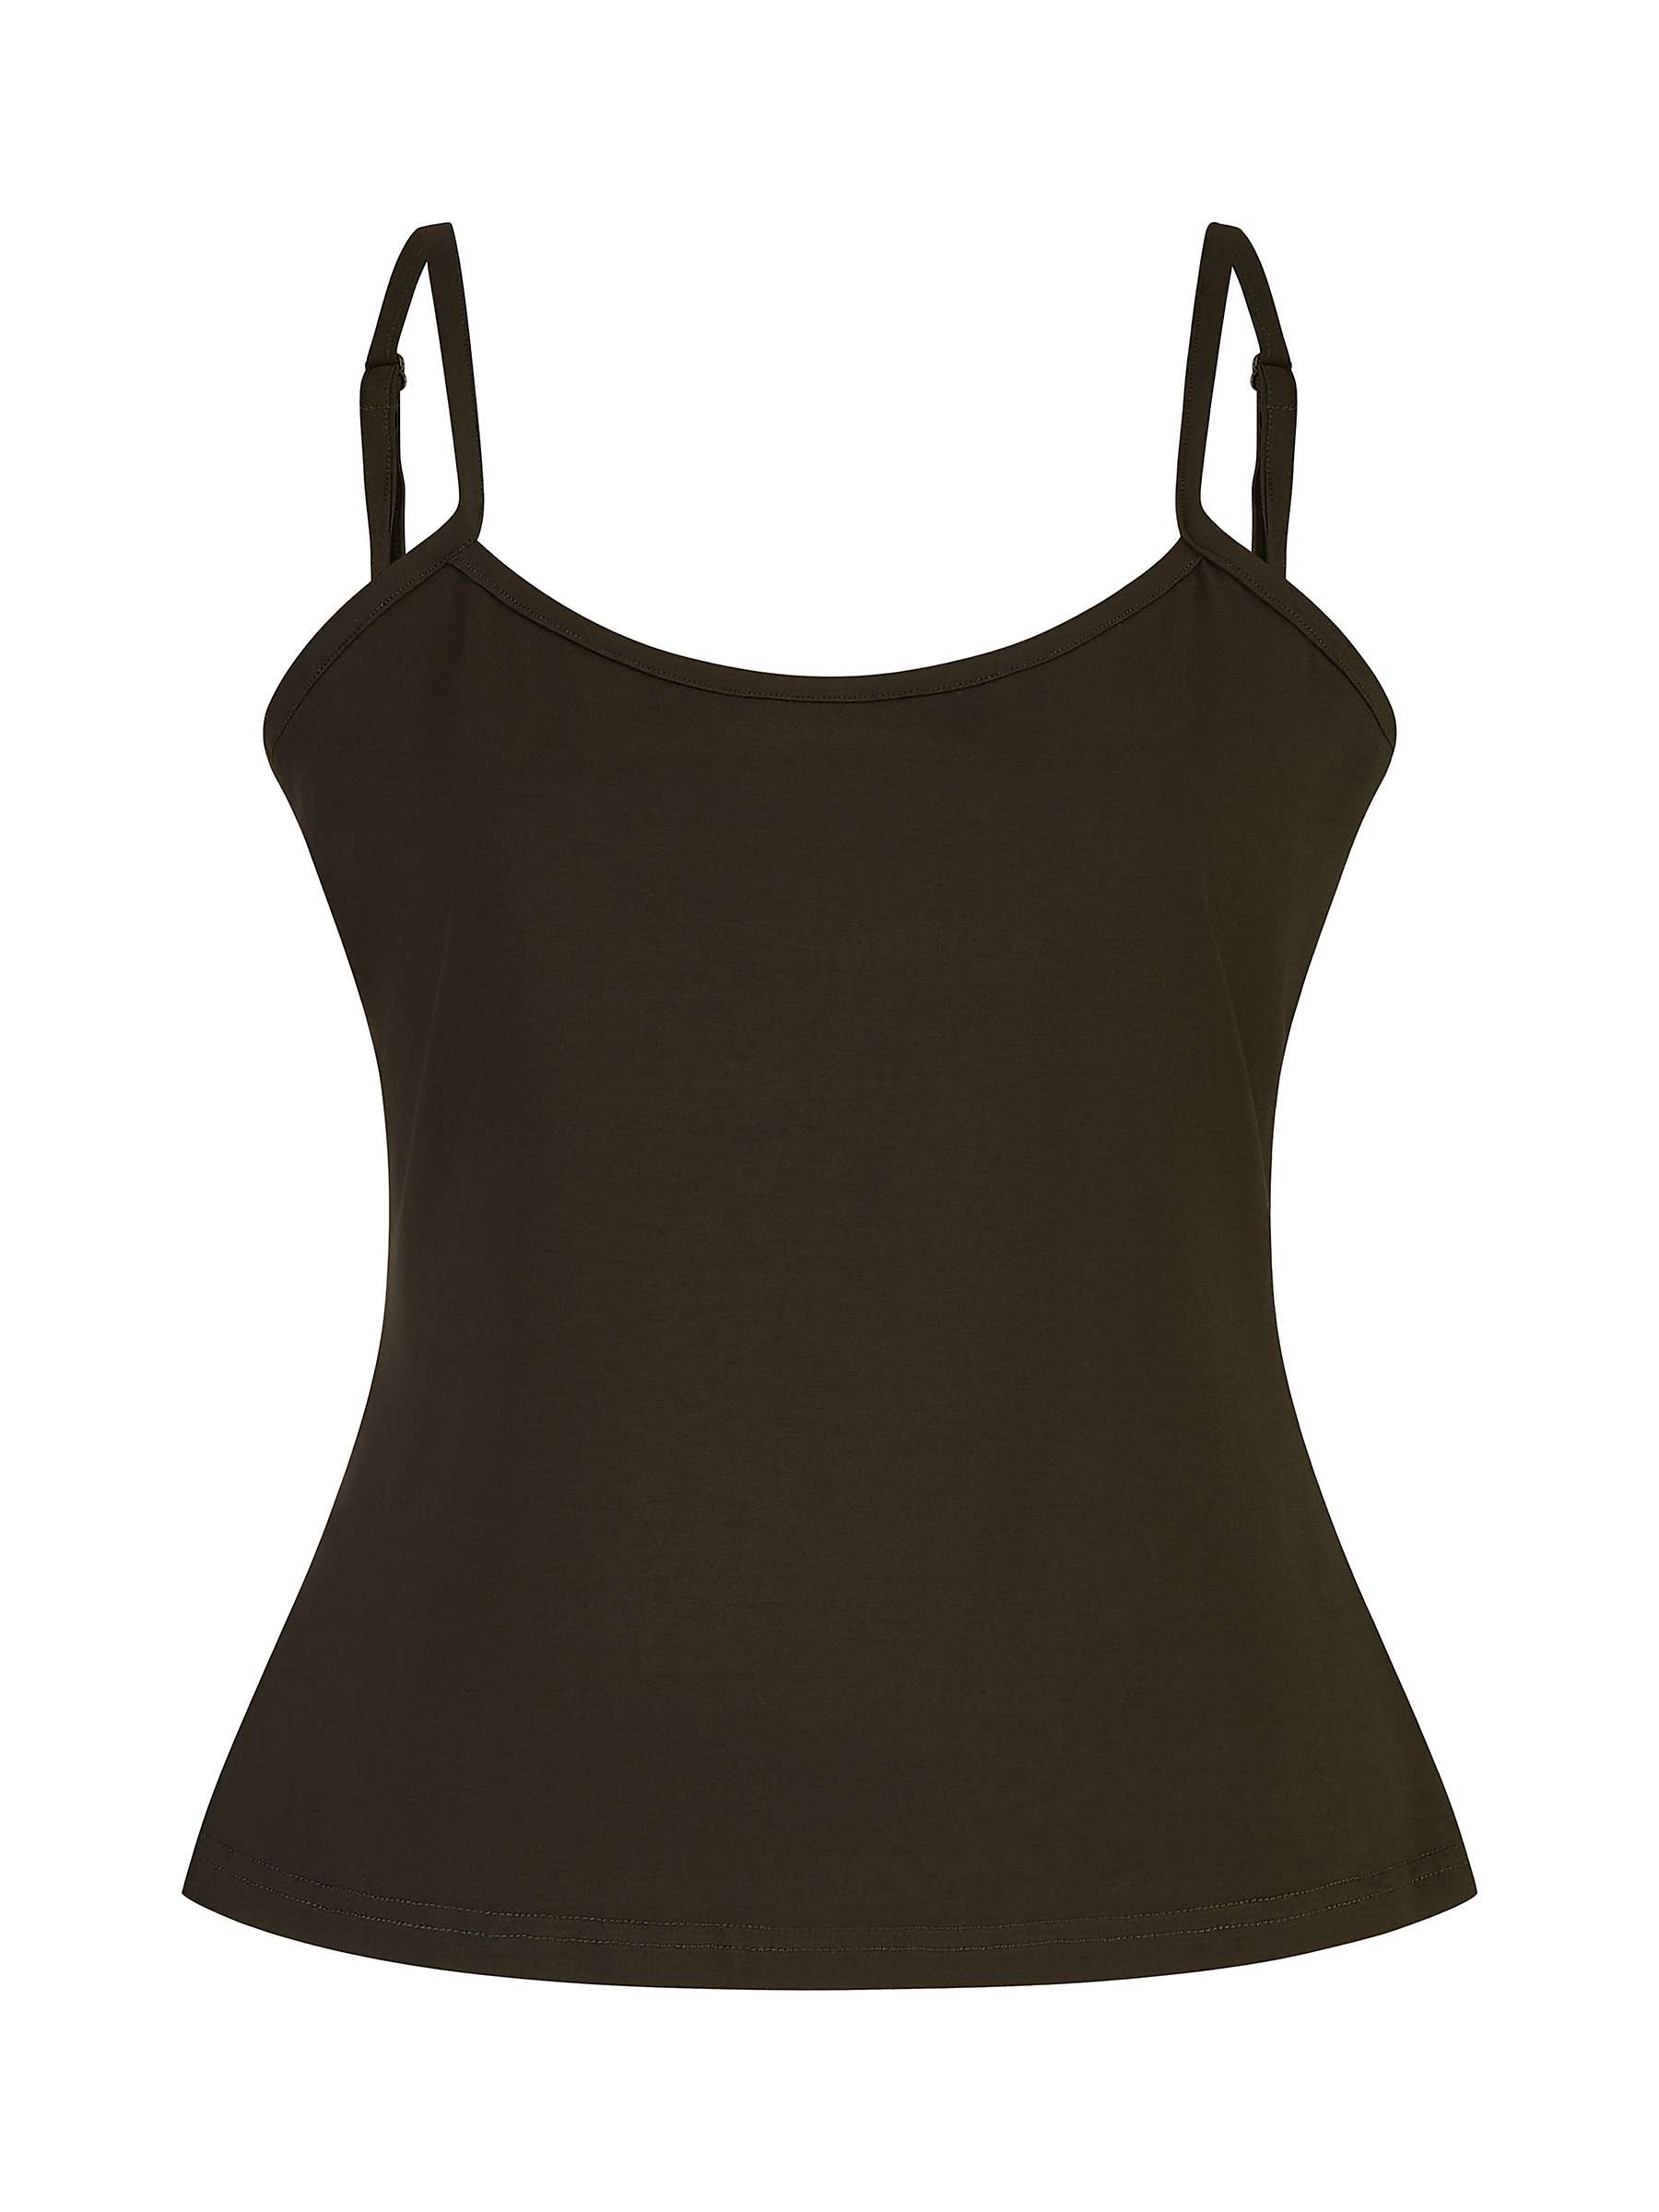 Buy Yumi Stretch Cami Top Online at johnlewis.com